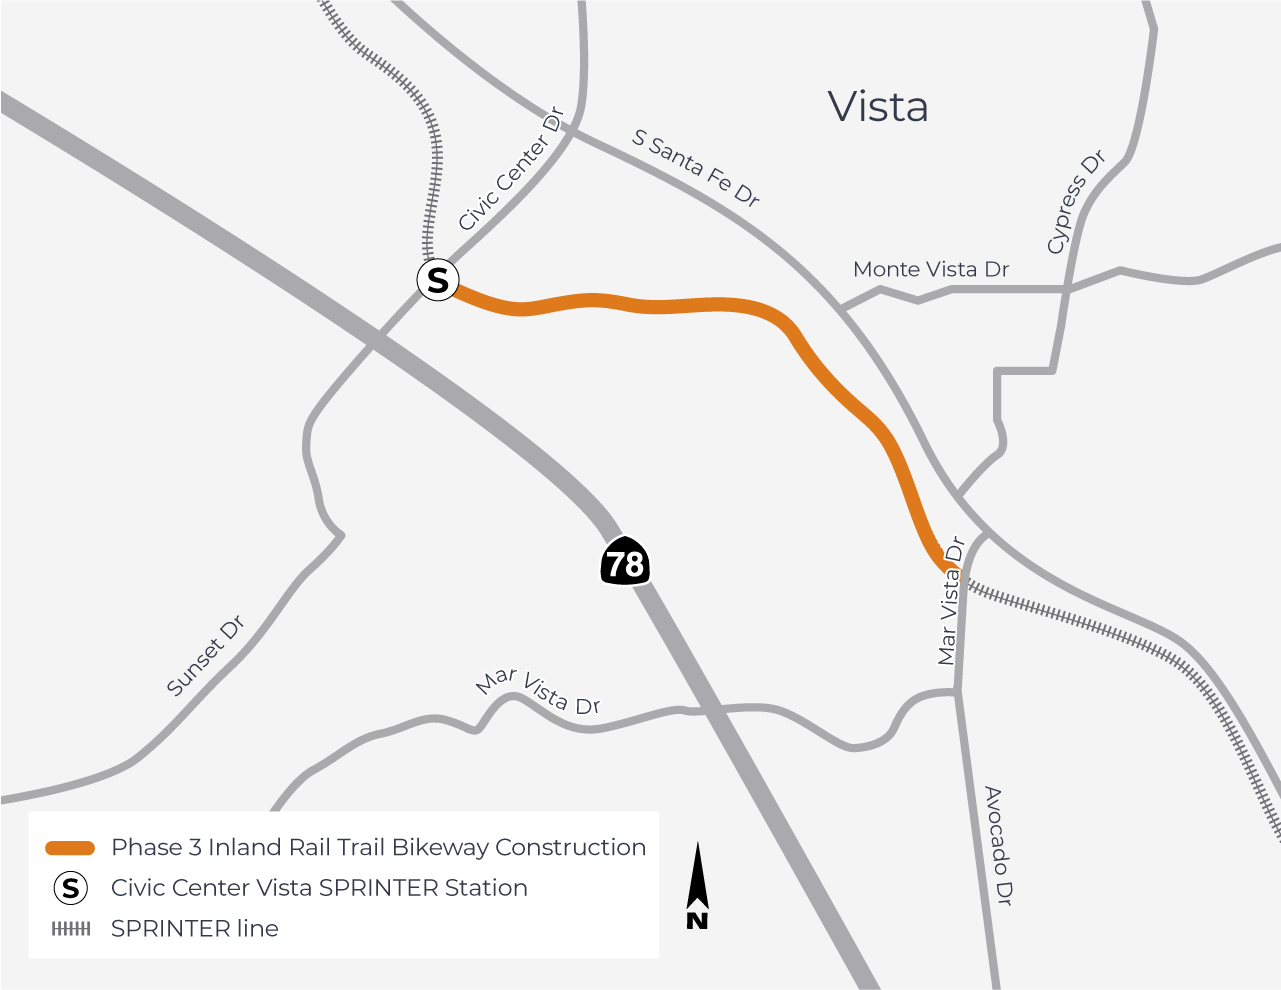 Inland Rail Trail Bikeway Phase 3 Construction map showing one mile of construction from Mar Vista Drive in the south, to Civic Center Drive in the north, ending right at the Civic Center Vista SPRINTER Station. The SPRINTER line continues up the north and south side of the 1 mile construction area.